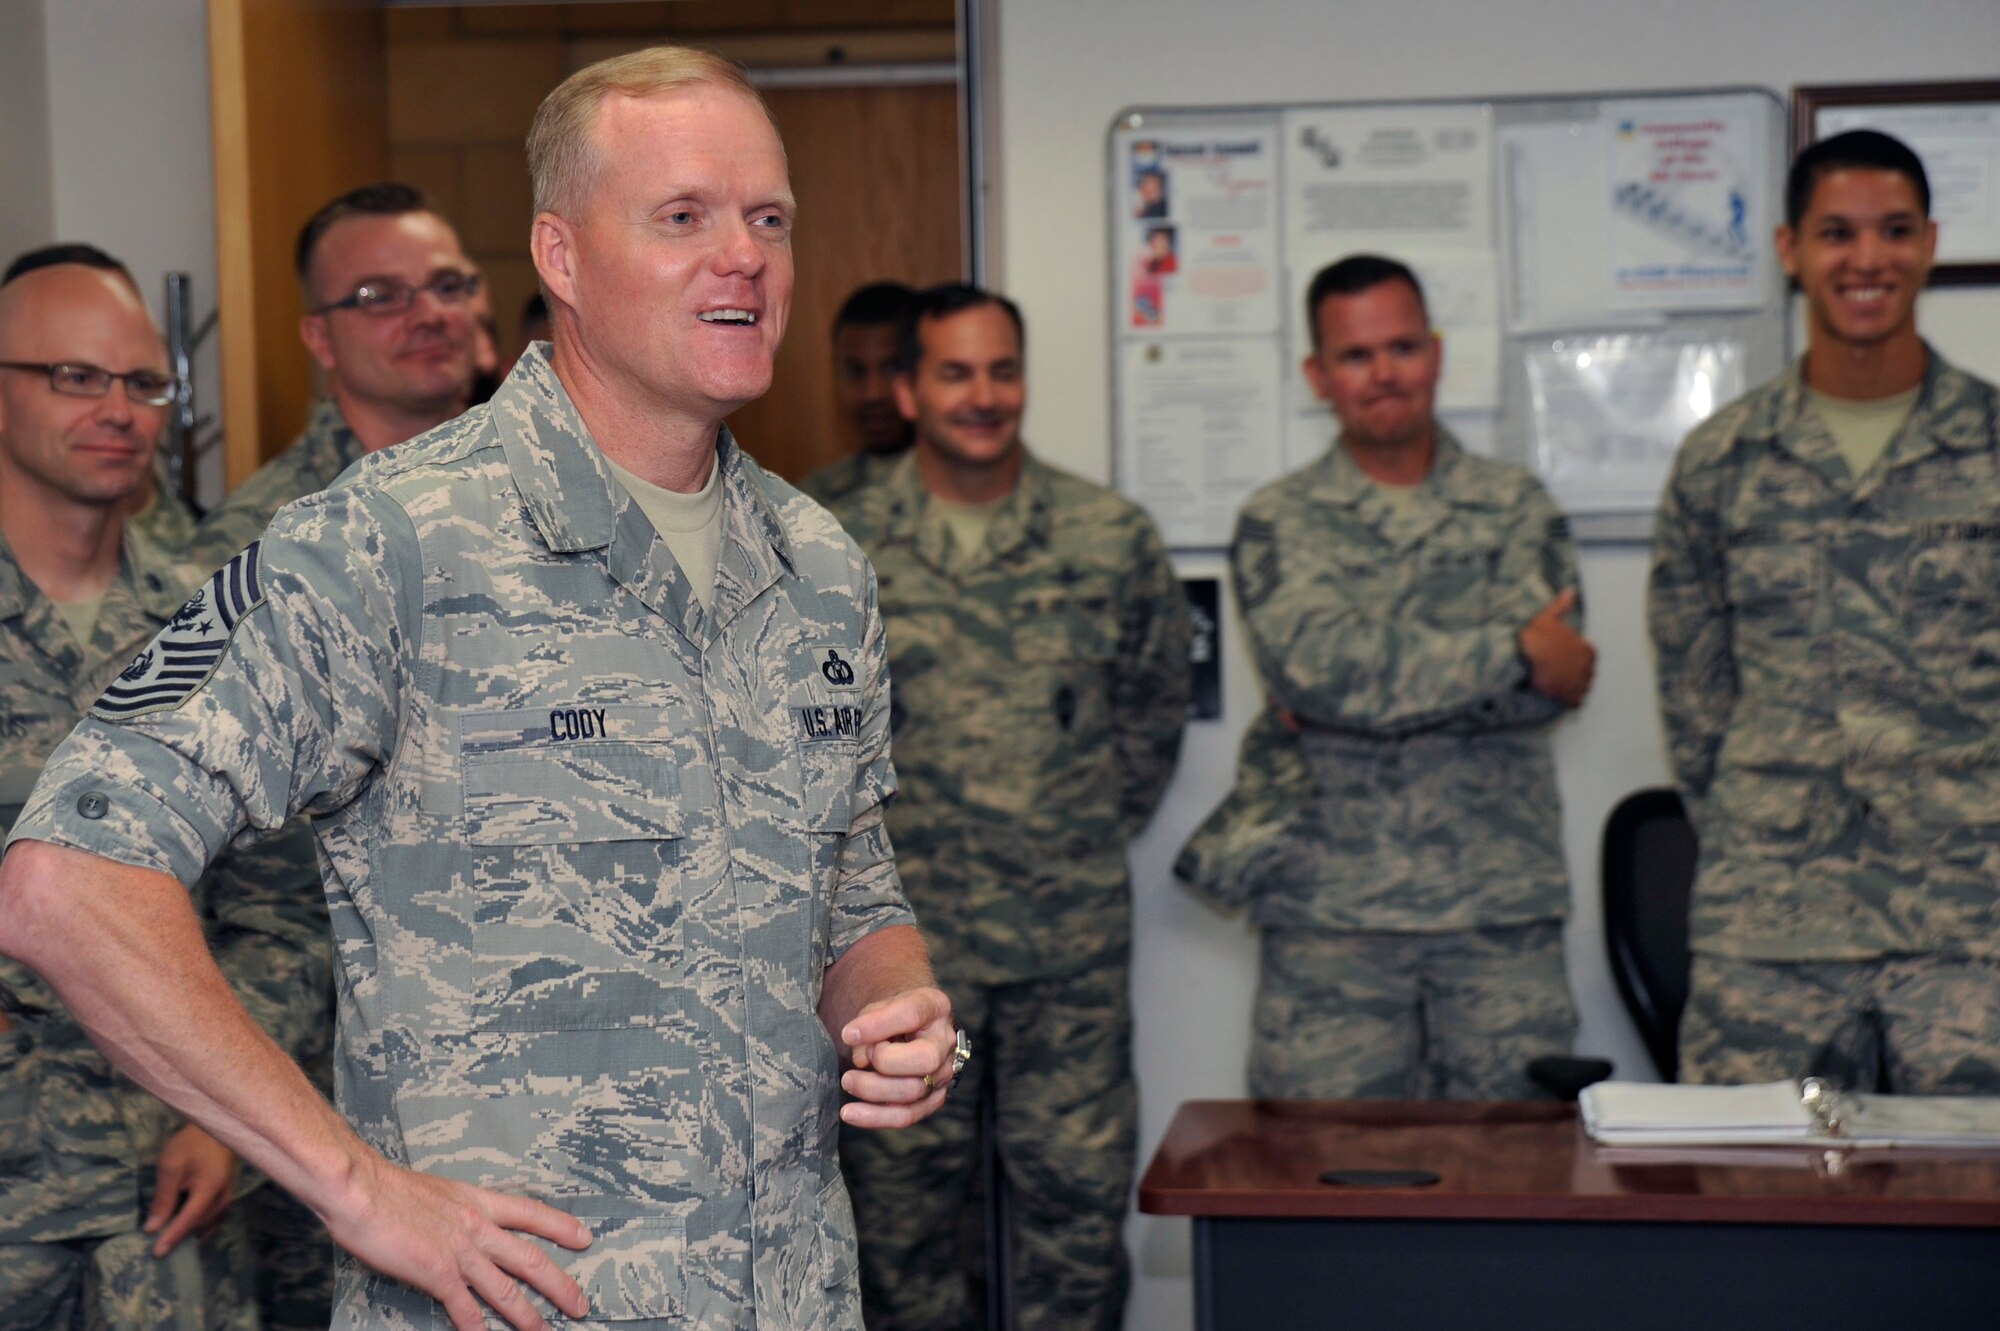 Chief Master Sgt. of the Air Force, James A. Cody, discusses topics with a class of future Space Operators going through Enlisted Undergraduate Space Training at the 381st Training Group campus, July 8, 2014, Vandenberg Air Force Base, Calif. (U.S. Air Force photo by Michael Peterson/Released)